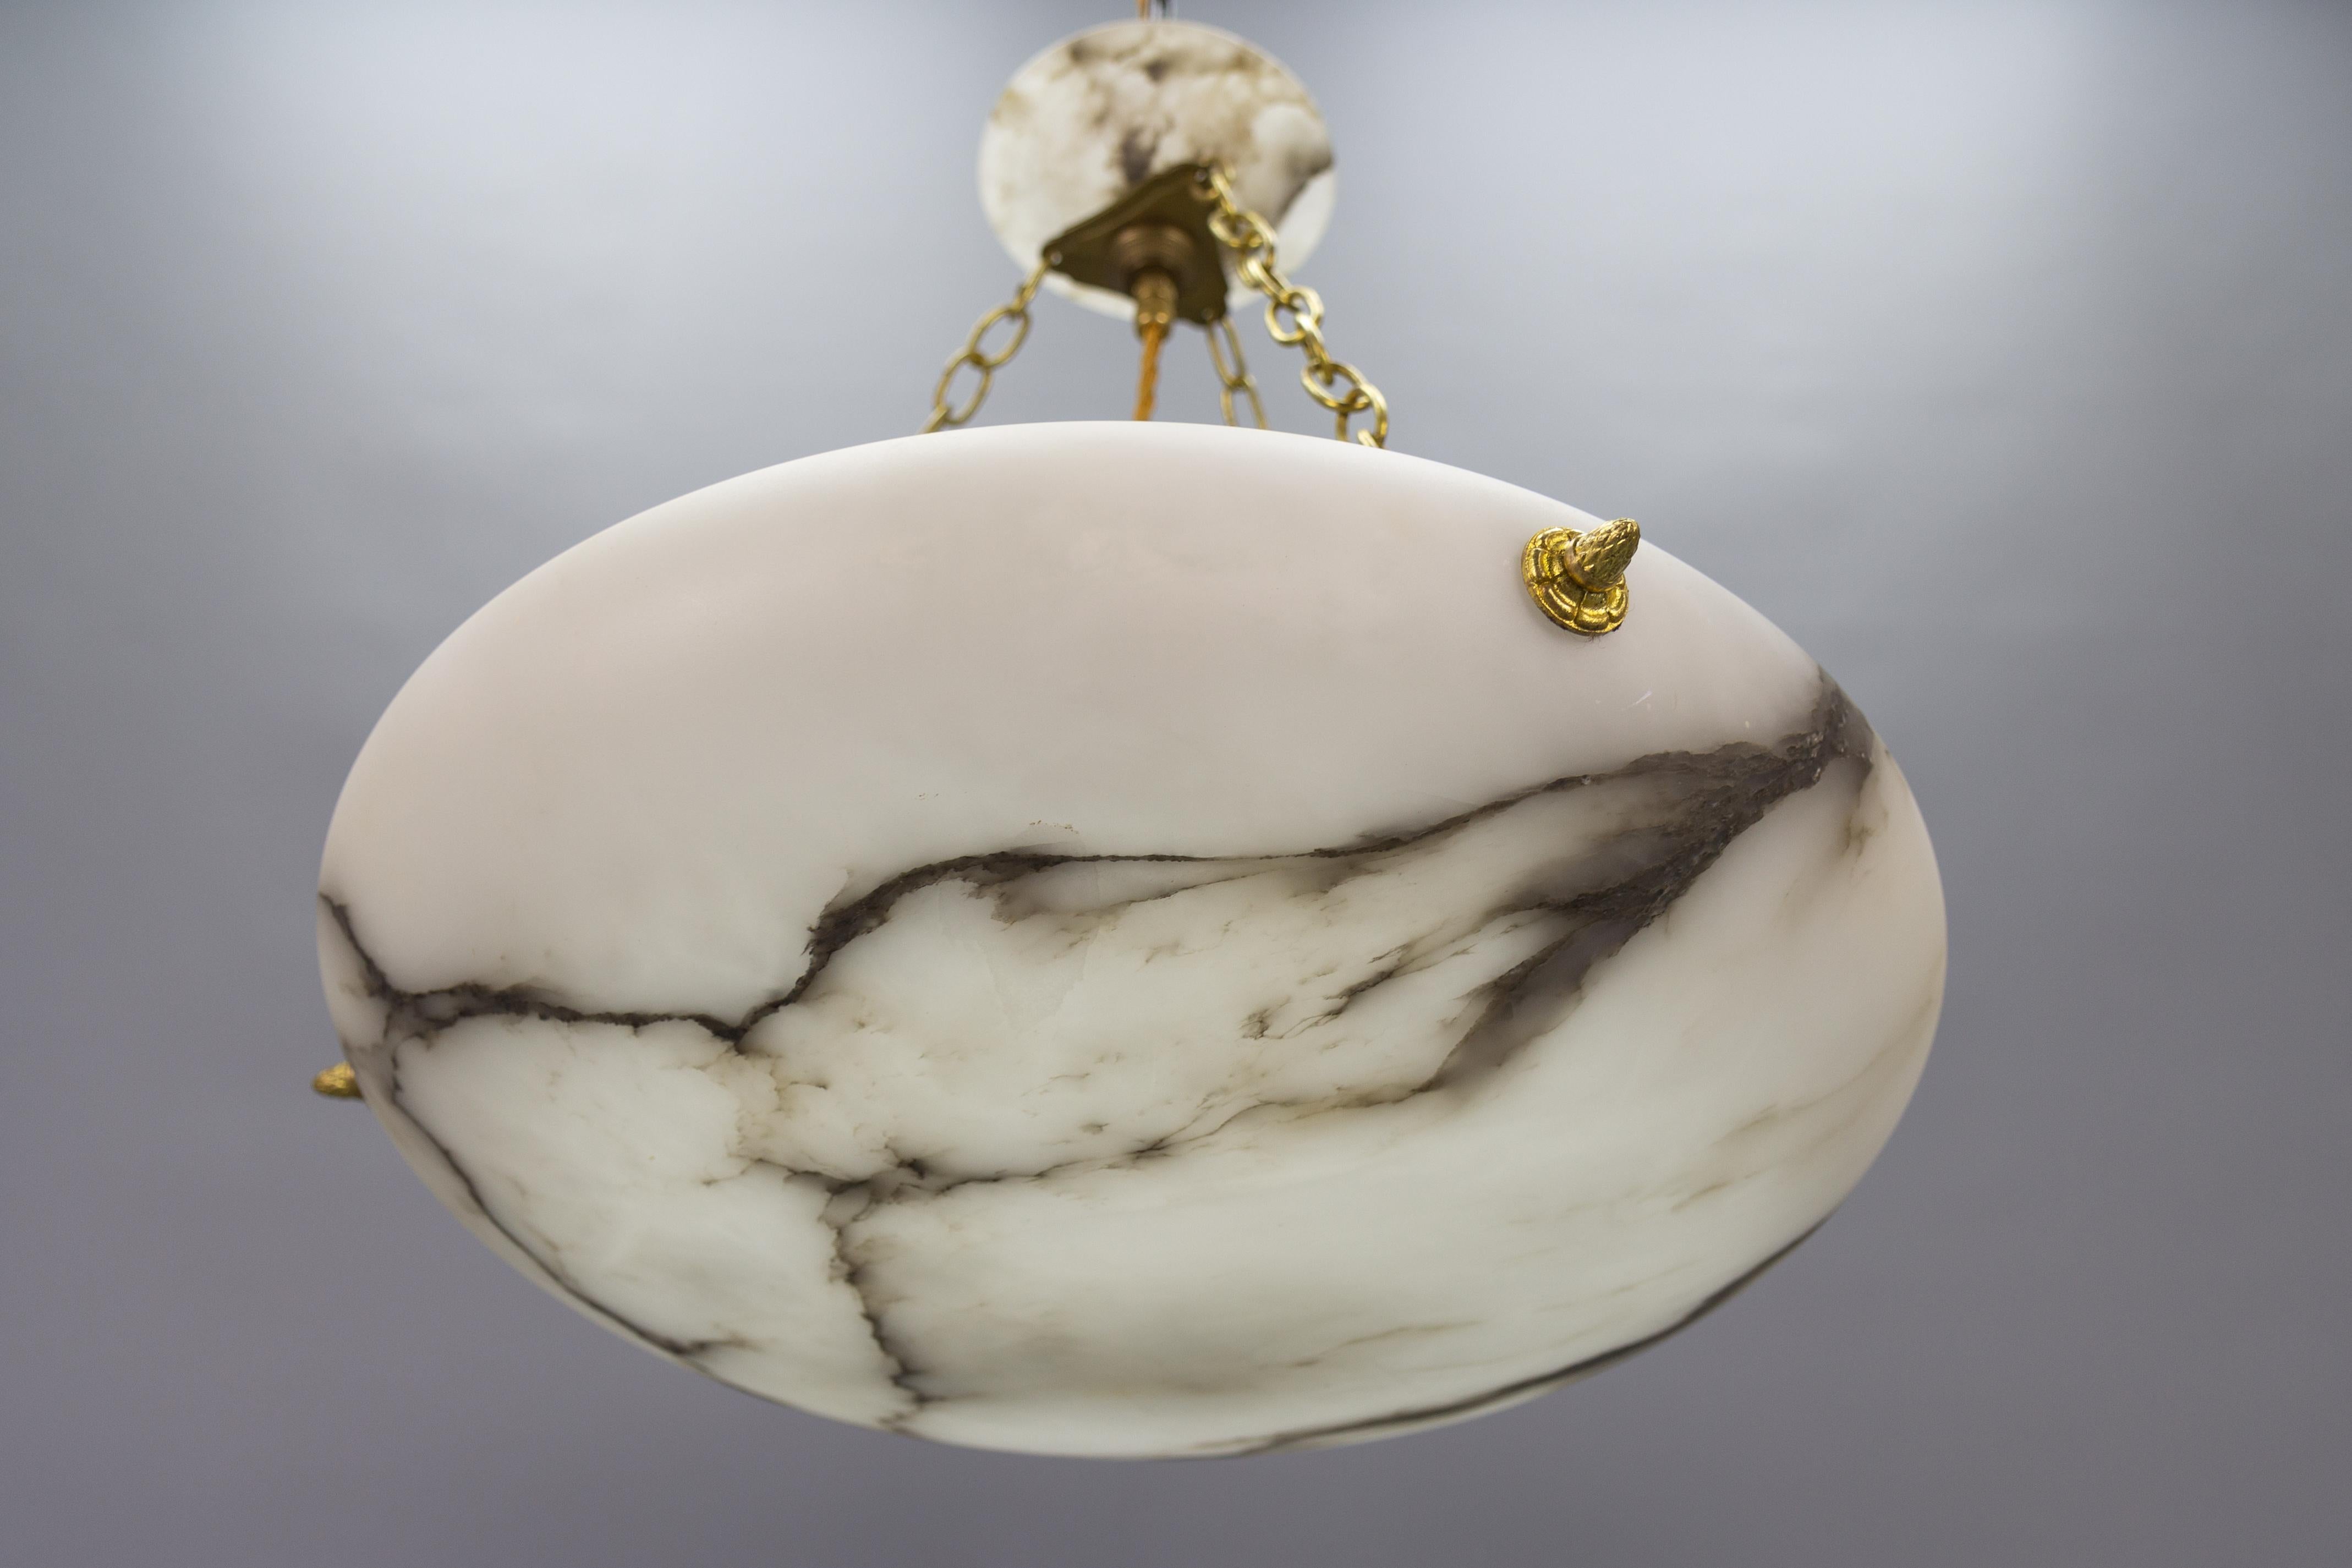 A French Art Deco period black veined white alabaster pendant light fixture.
A wonderful alabaster pendant ceiling light fixture from circa the 1920s. Beautifully veined and masterfully carved ufo-shaped white alabaster bowl suspended by three